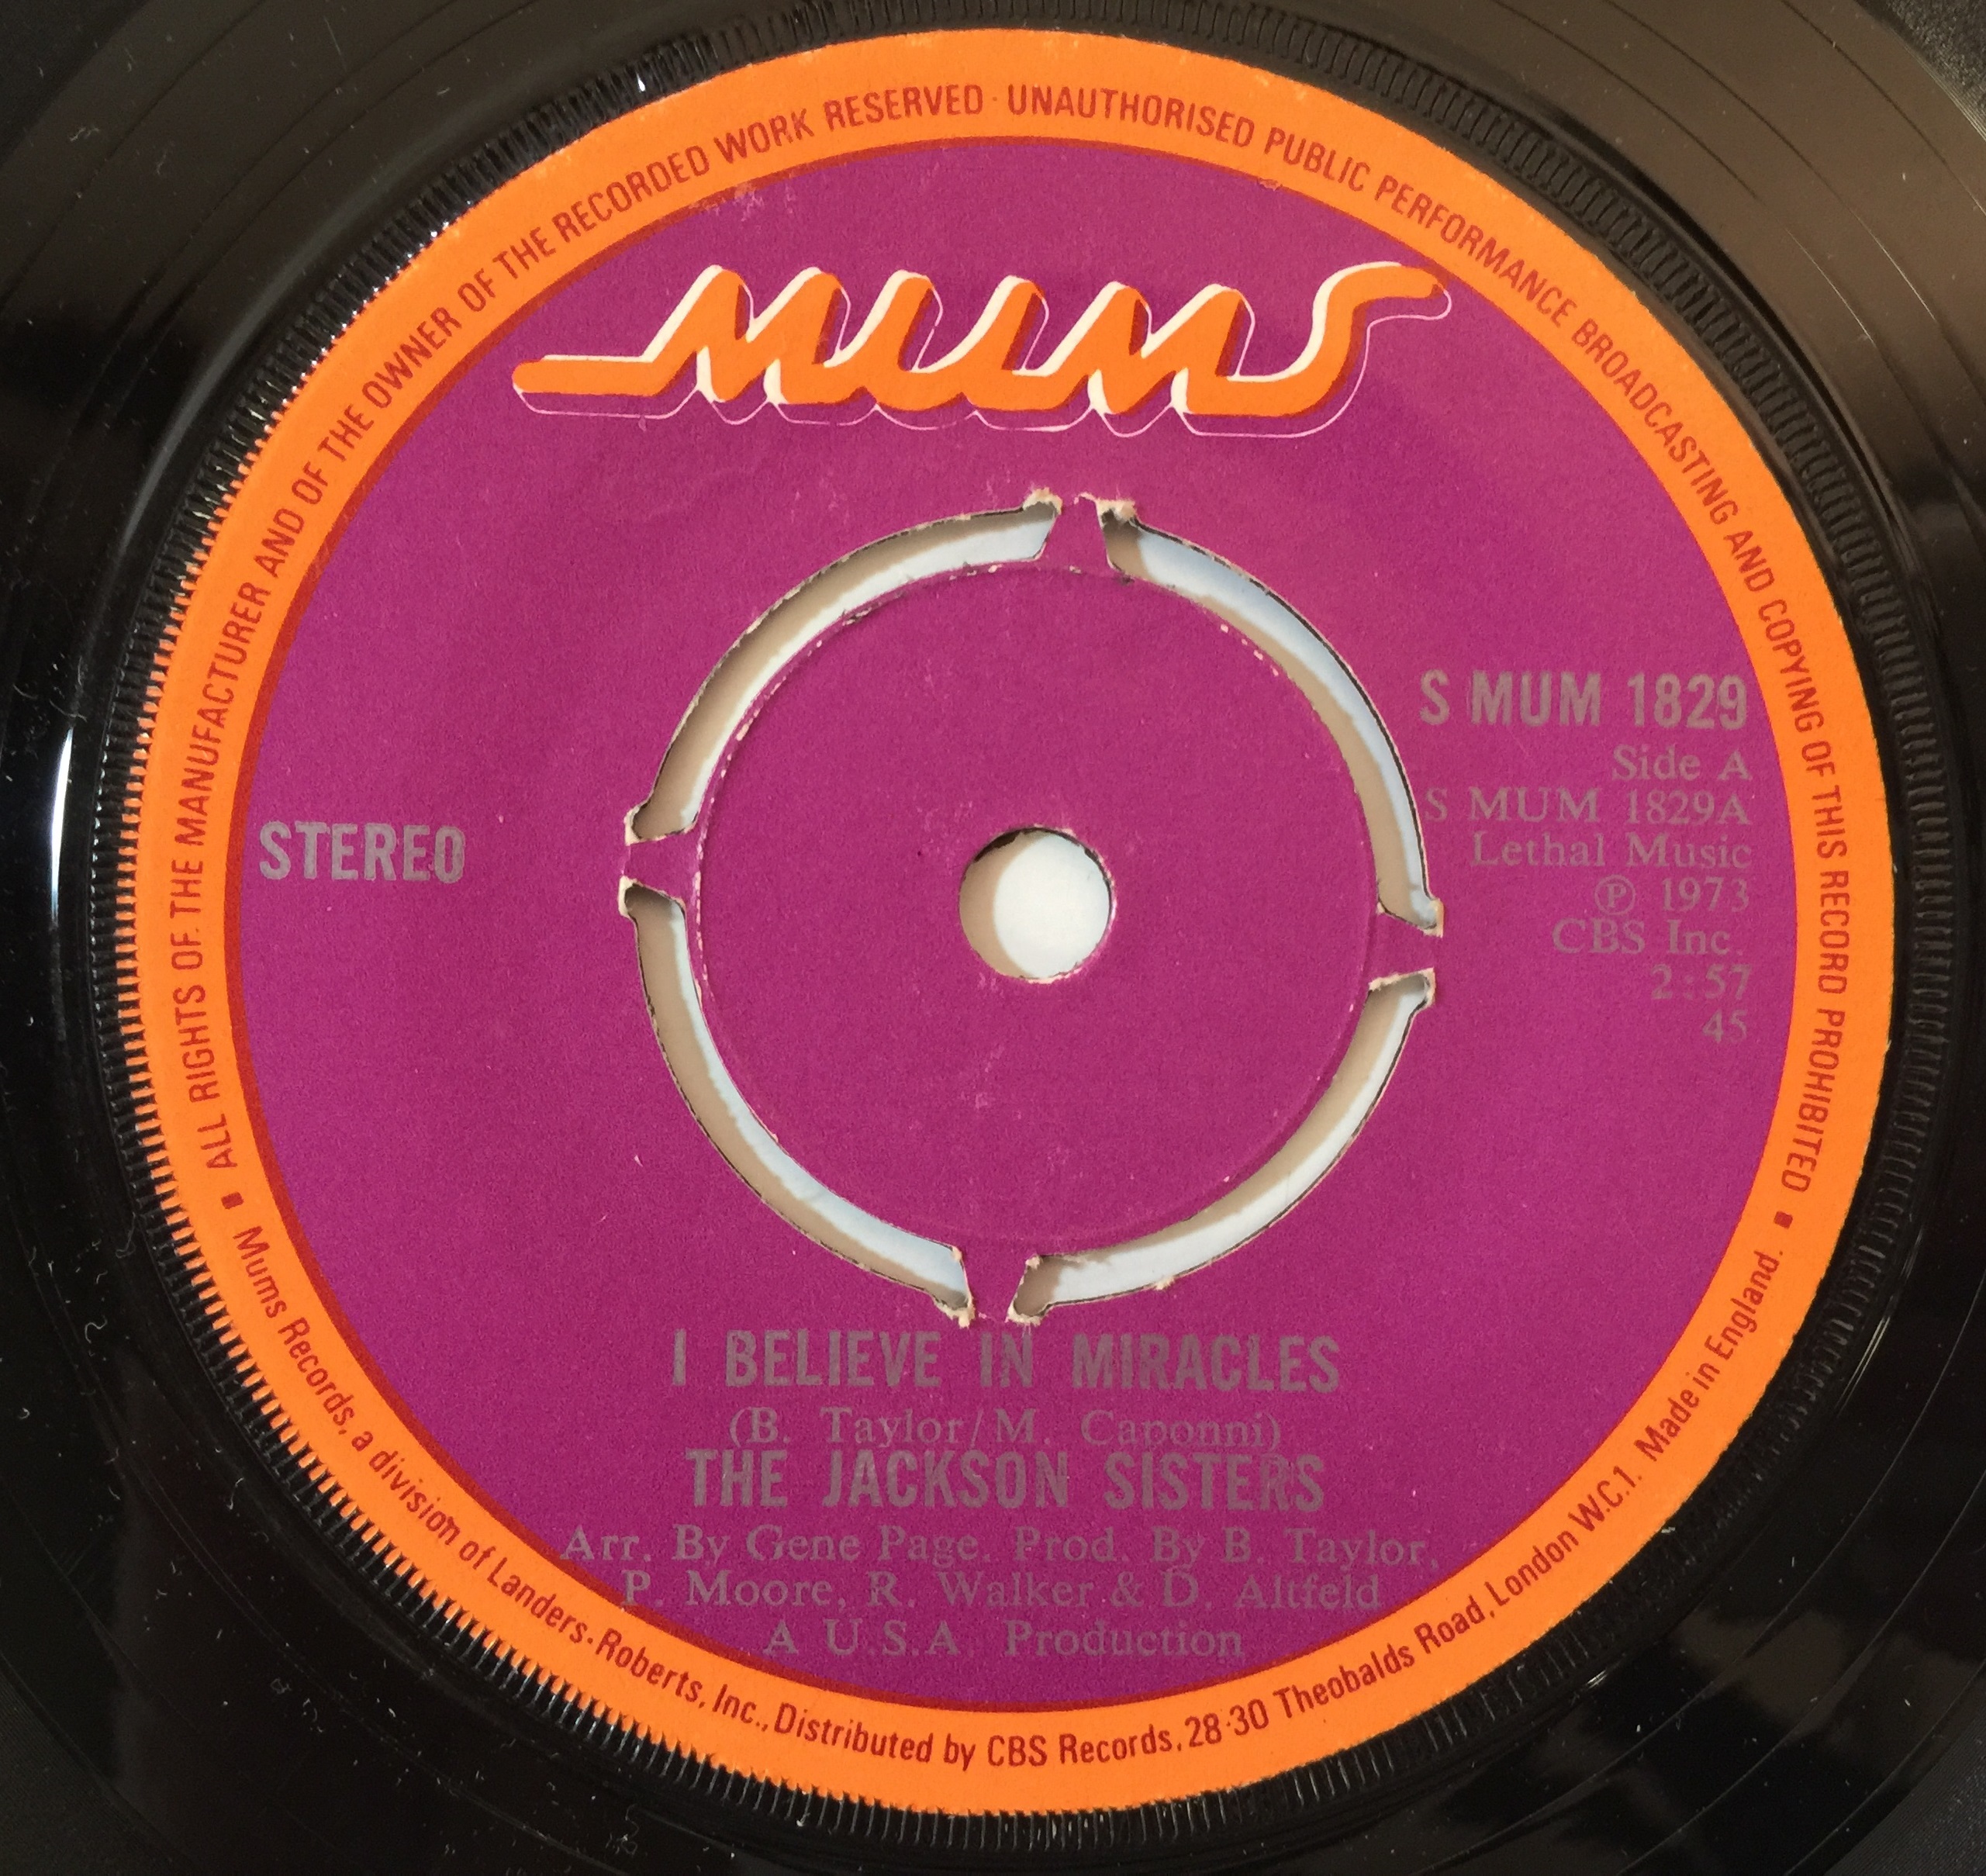 Lot 1003 - THE JACKSON SISTERS - I BELIEVE IN MIRACLES